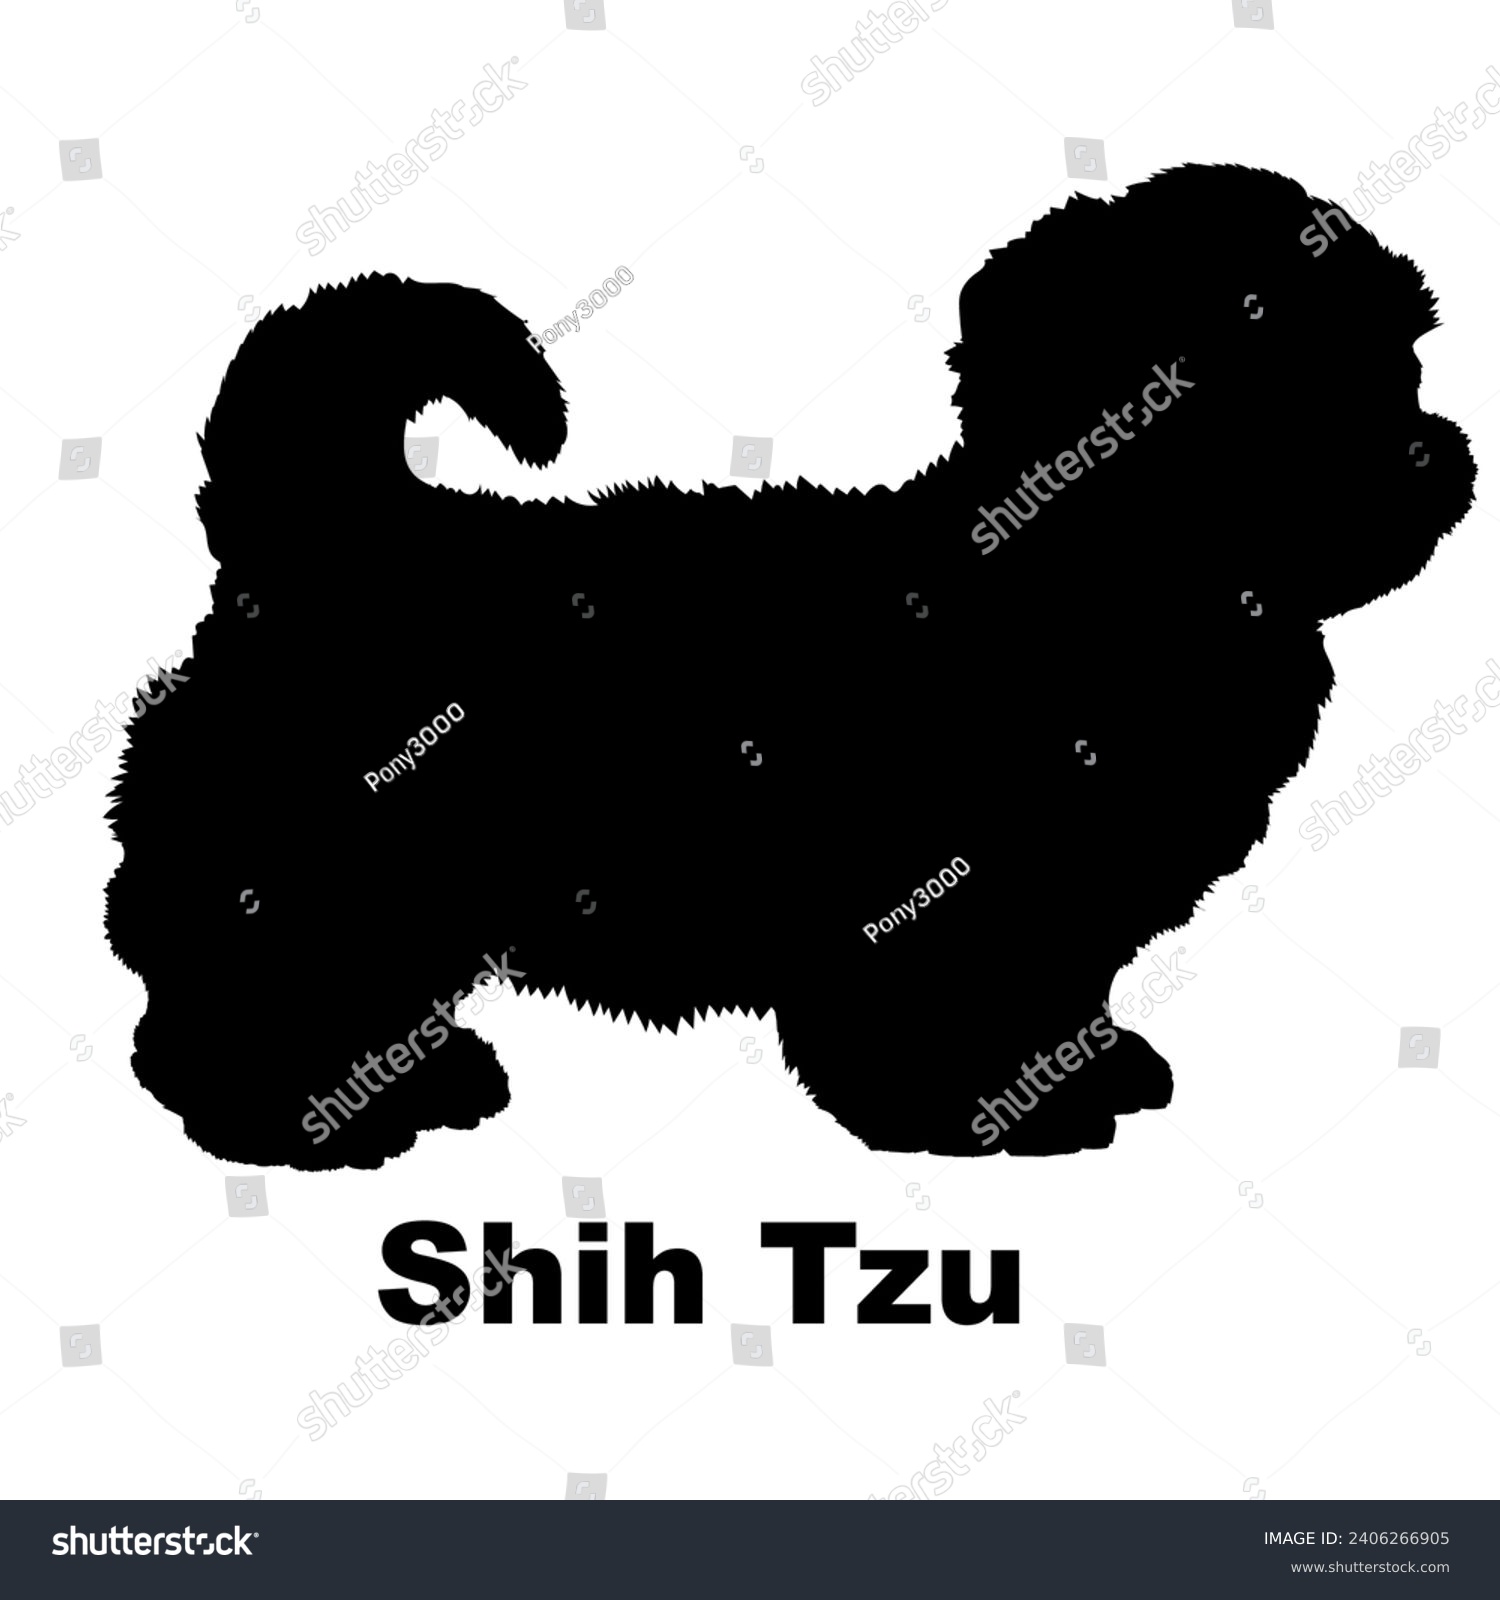 SVG of Dog Shih Tzu silhouette Breeds Bundle Dogs on the move. Dogs in different poses.
The dog jumps, the dog runs. The dog is sitting lying down playing
 svg